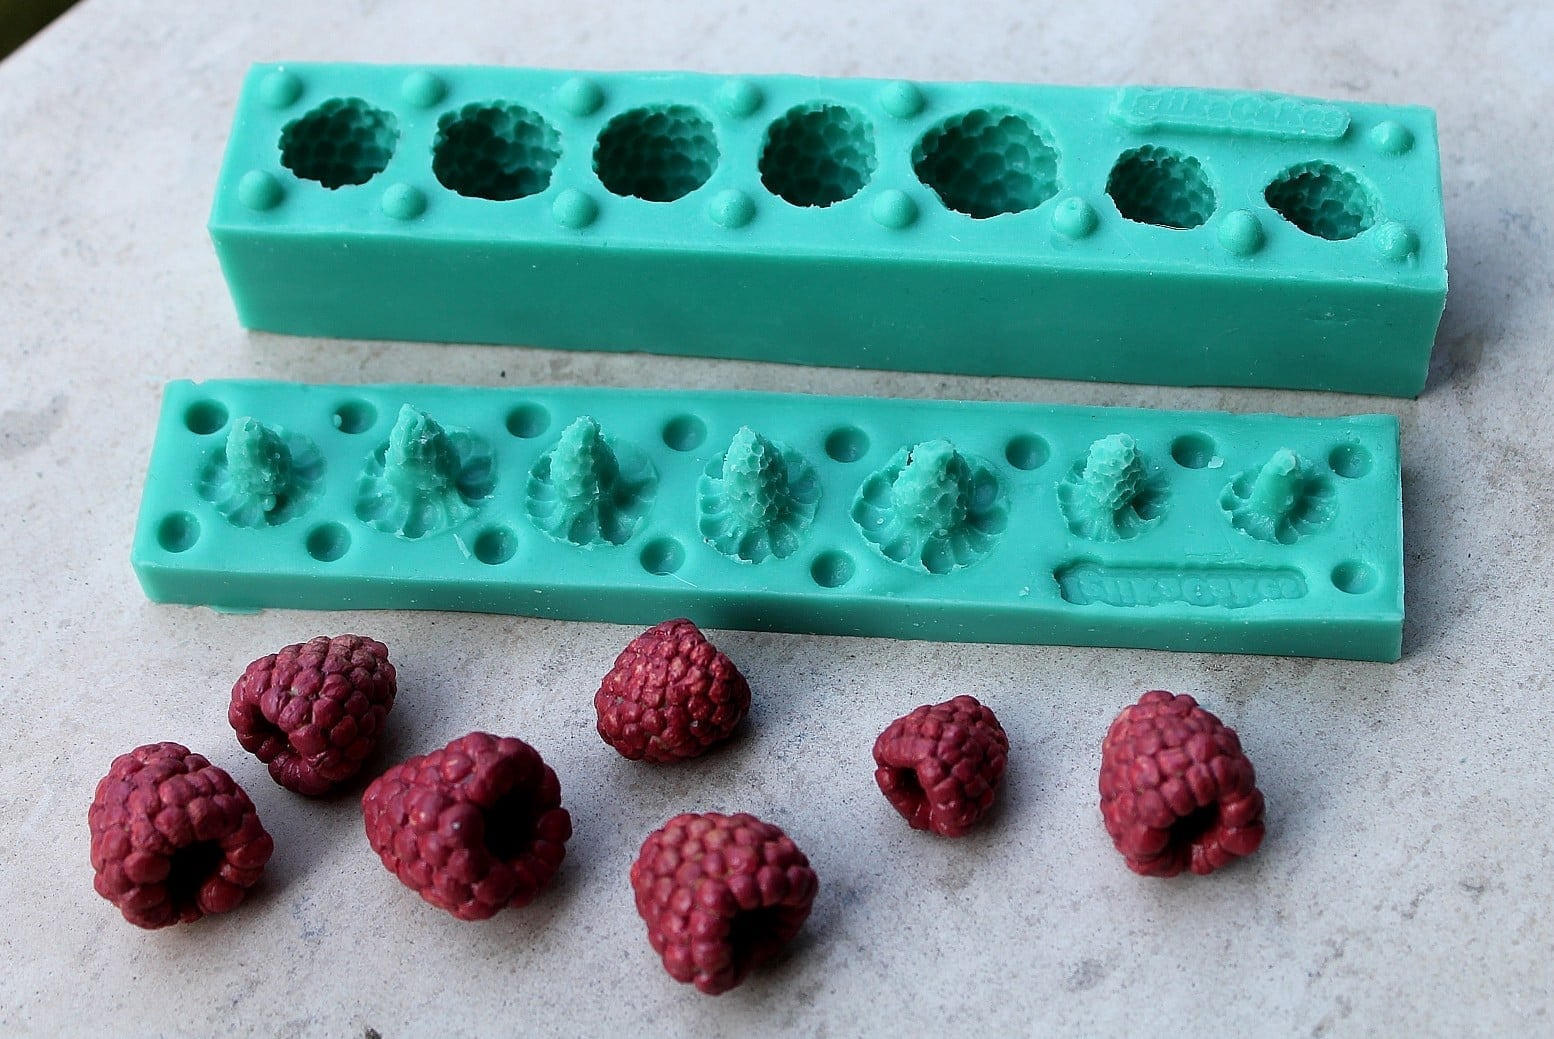 Raspberry Silicone Mold – Oh Sweet Art!